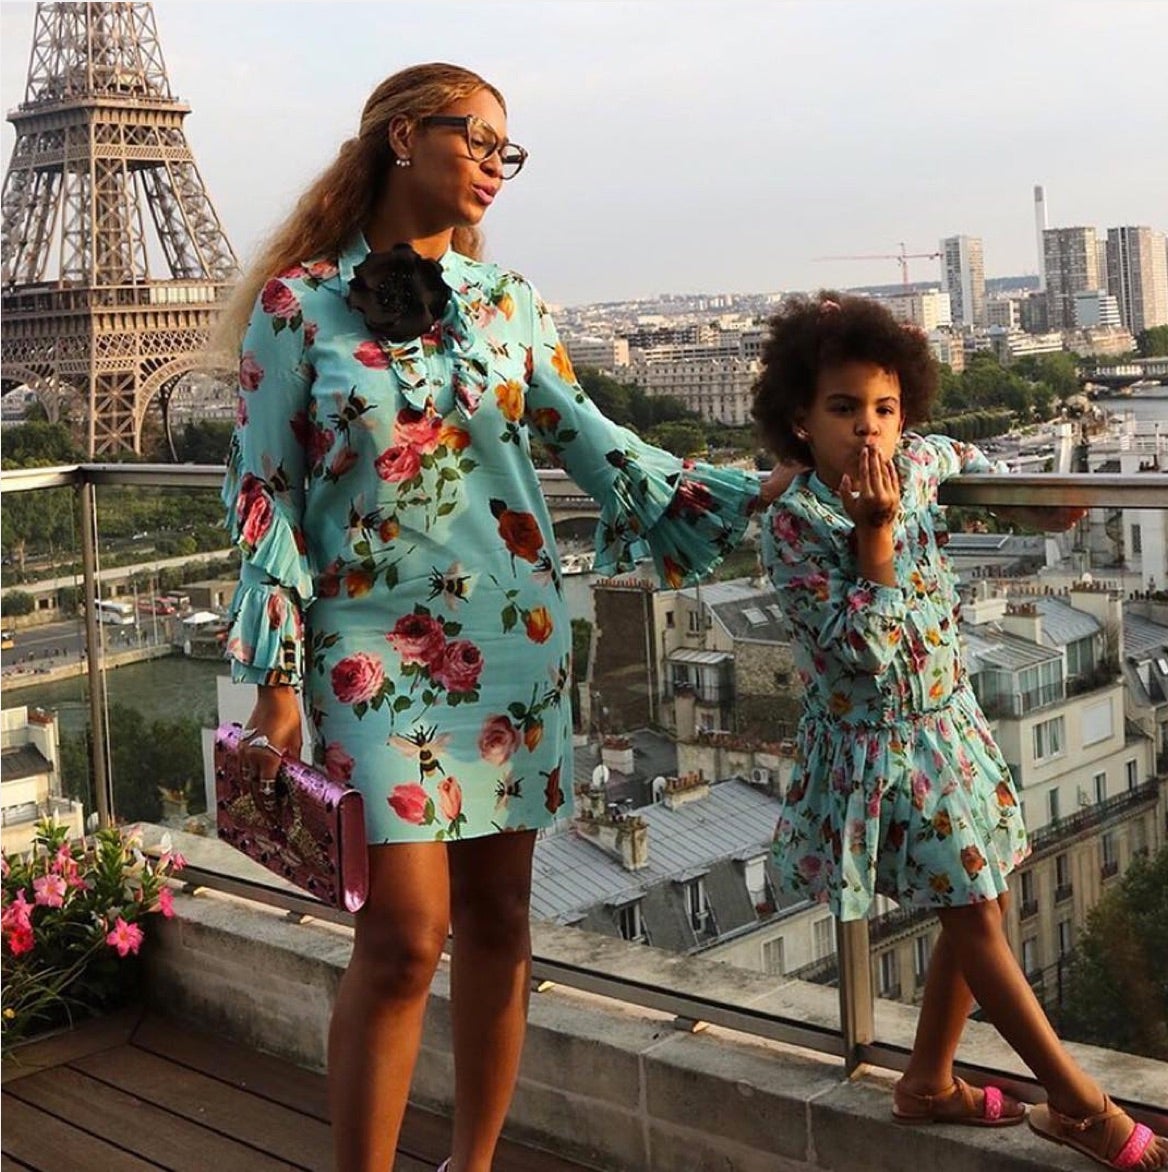 Beyonce and Blue Ivy in Matching Gucci Dresses is the Cutest Thing You'll See All Day
